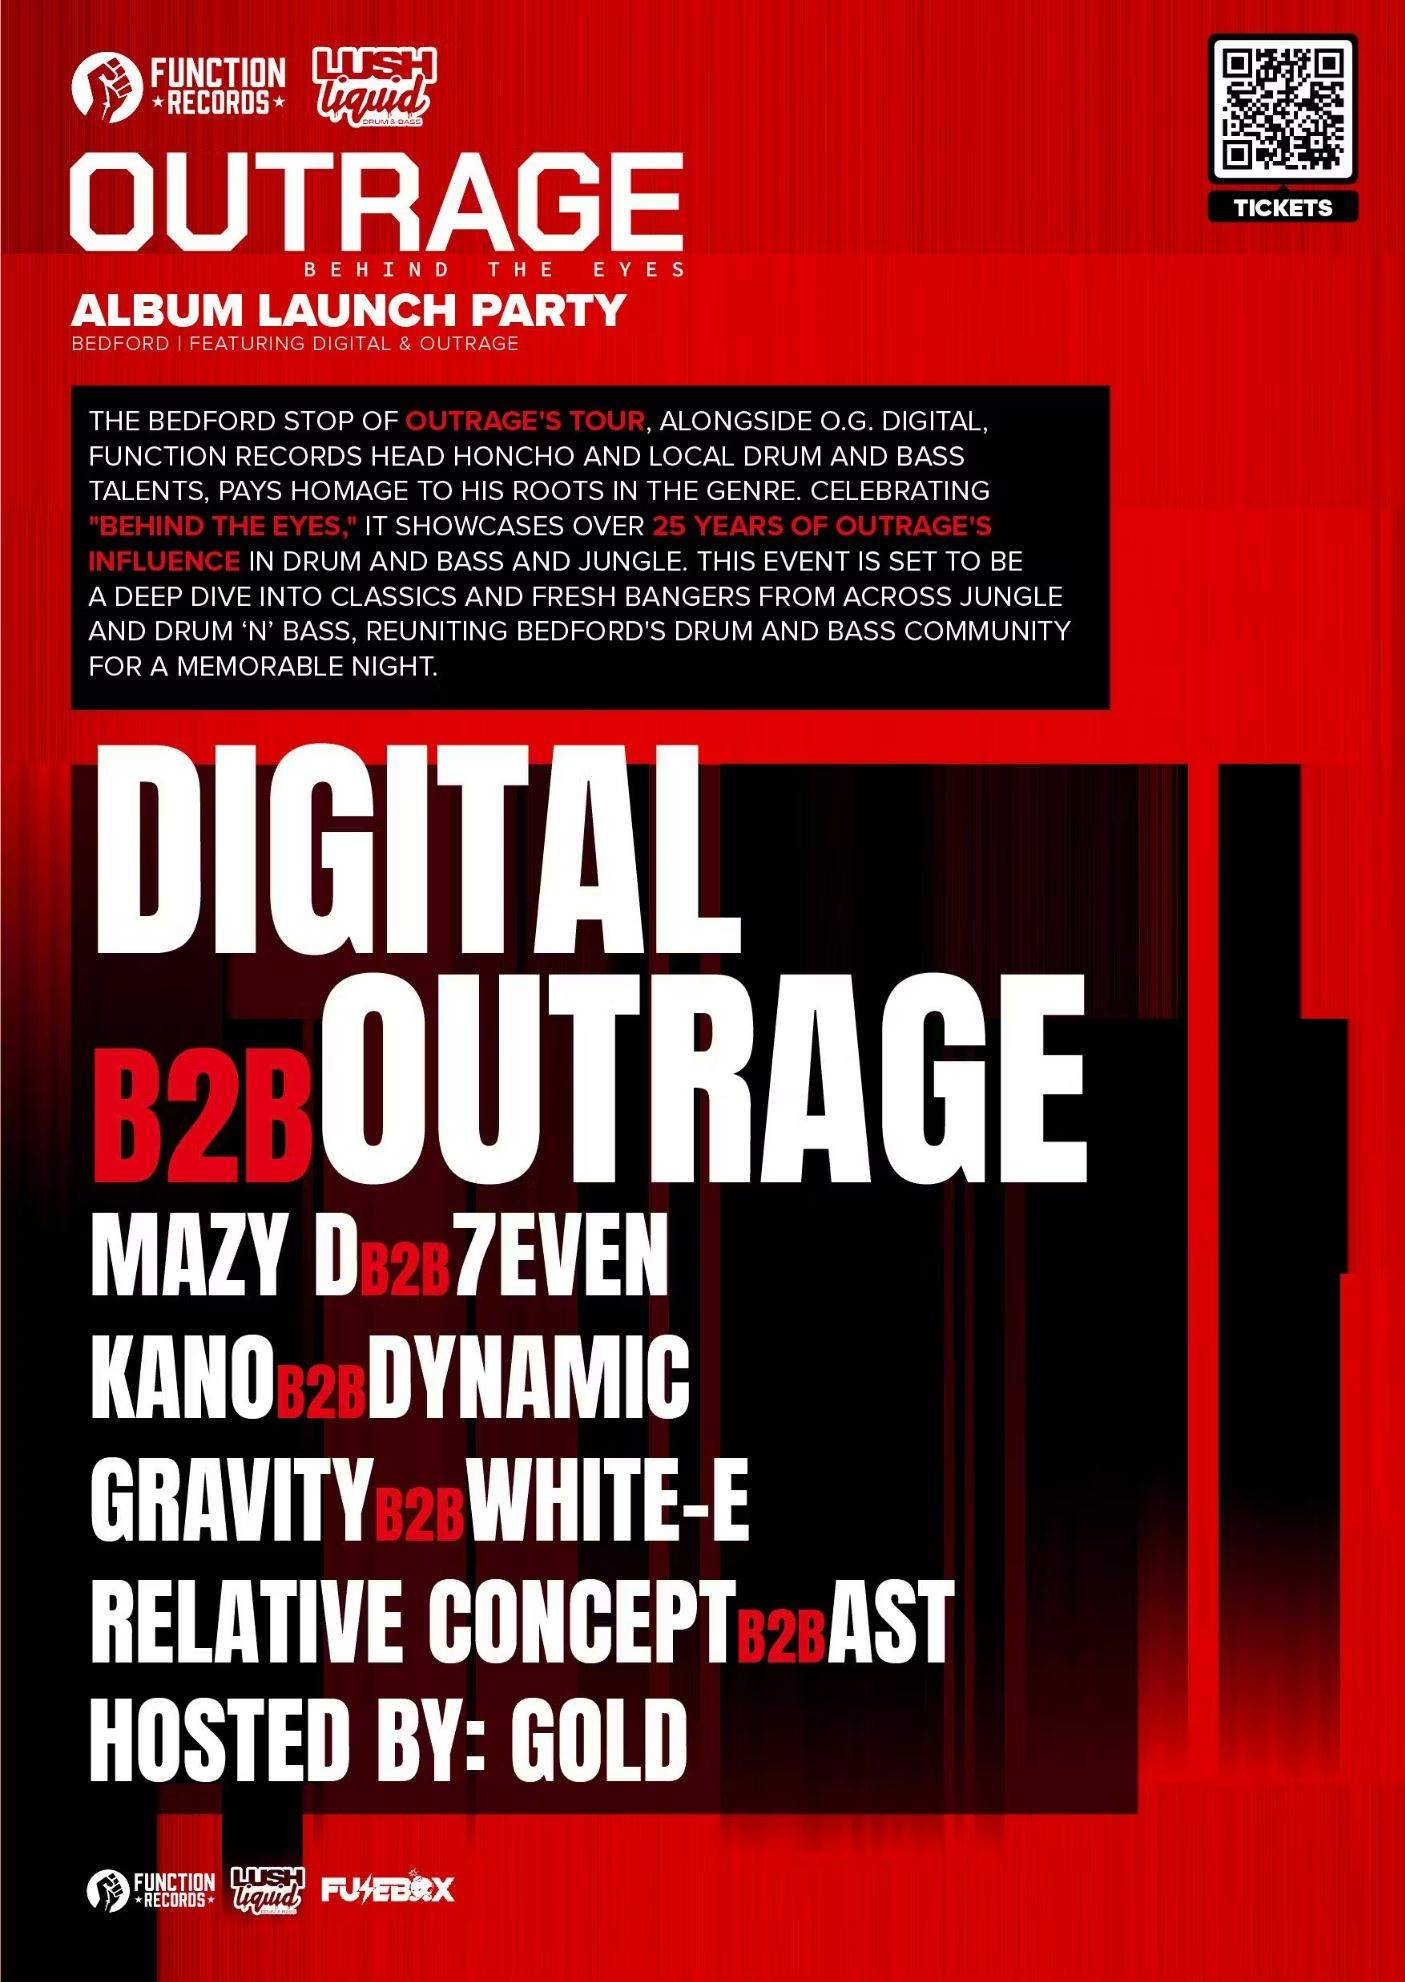 Outrage - Behind The Eyes: Album Launch Party - Página frontal